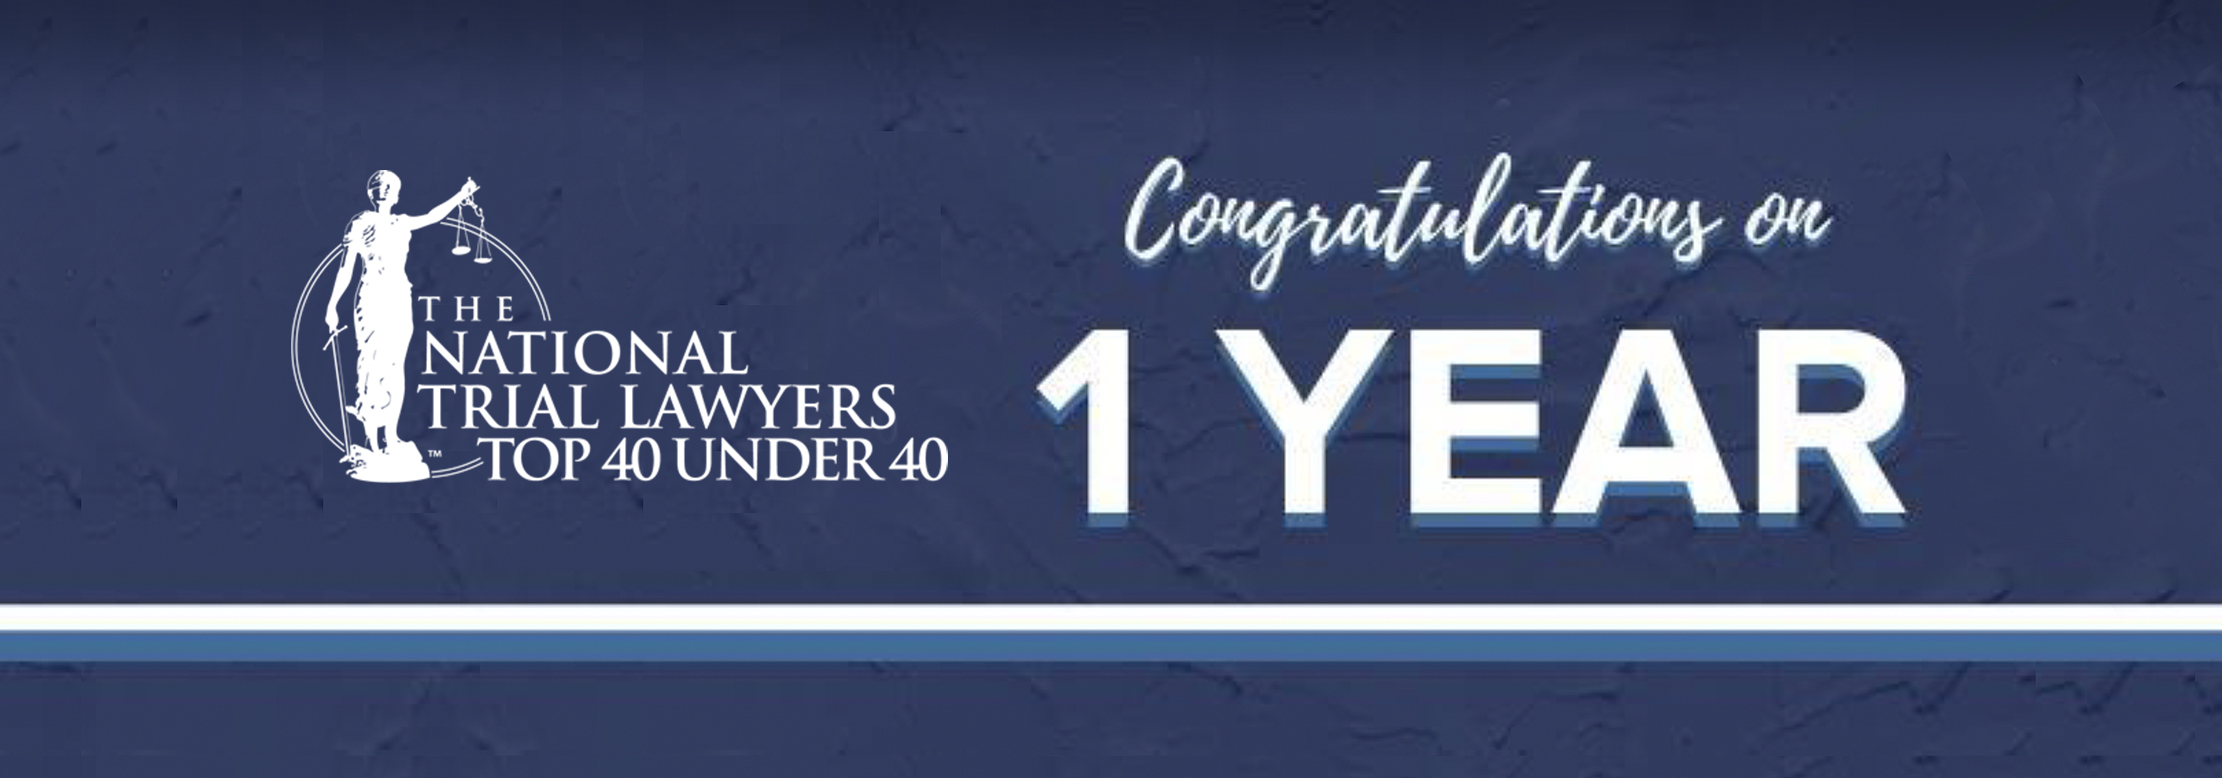 Congratulations on 1 Year on The National Trial Lawyers Top 40 Under 40